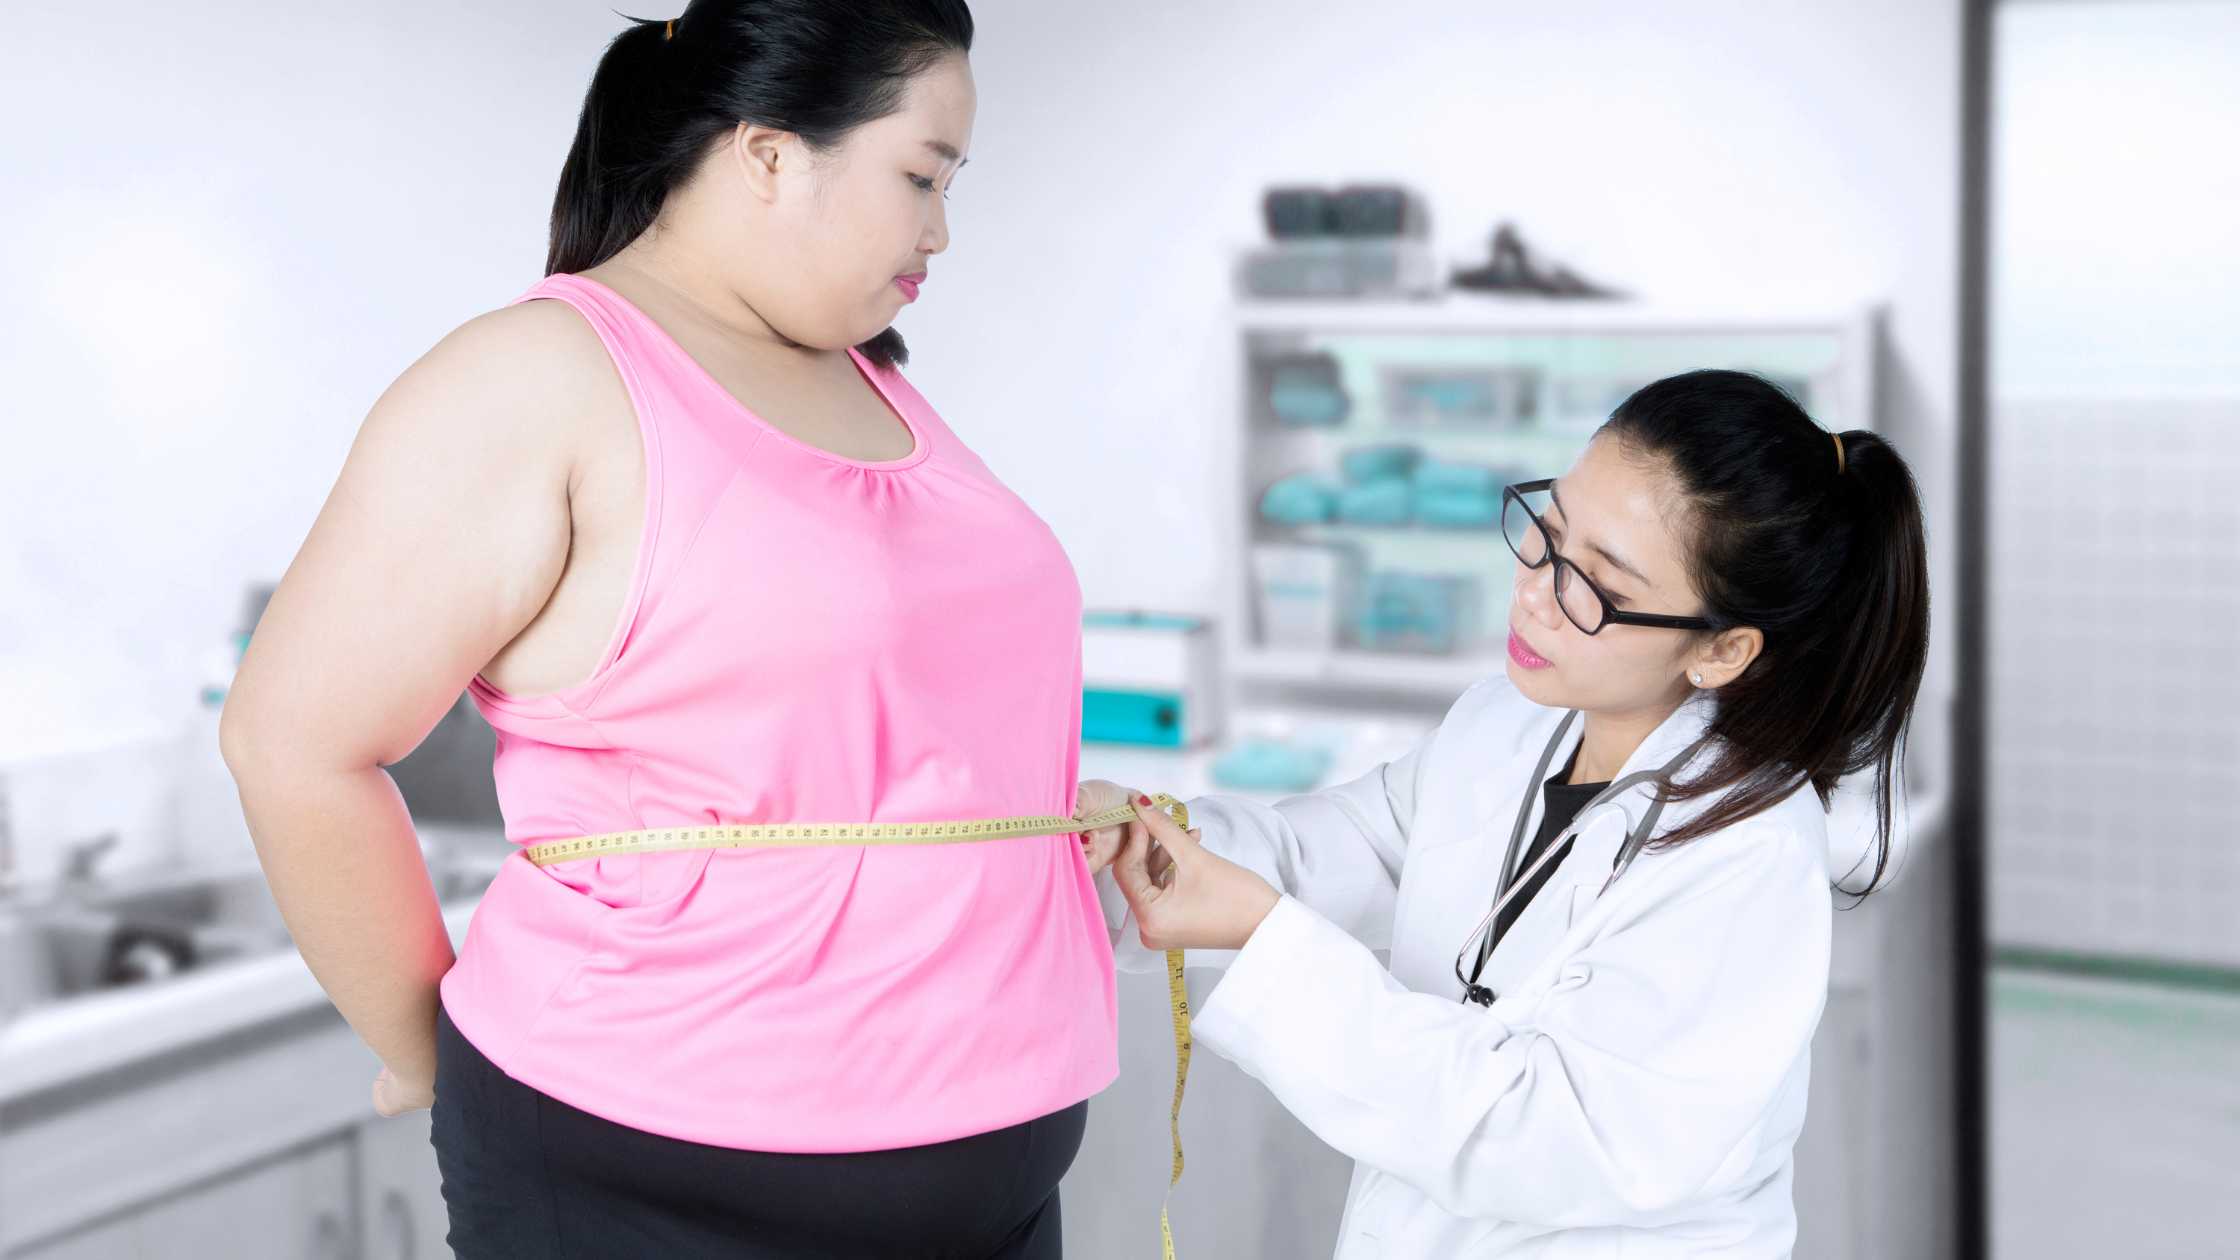 Bariatric surgery patient with doctor